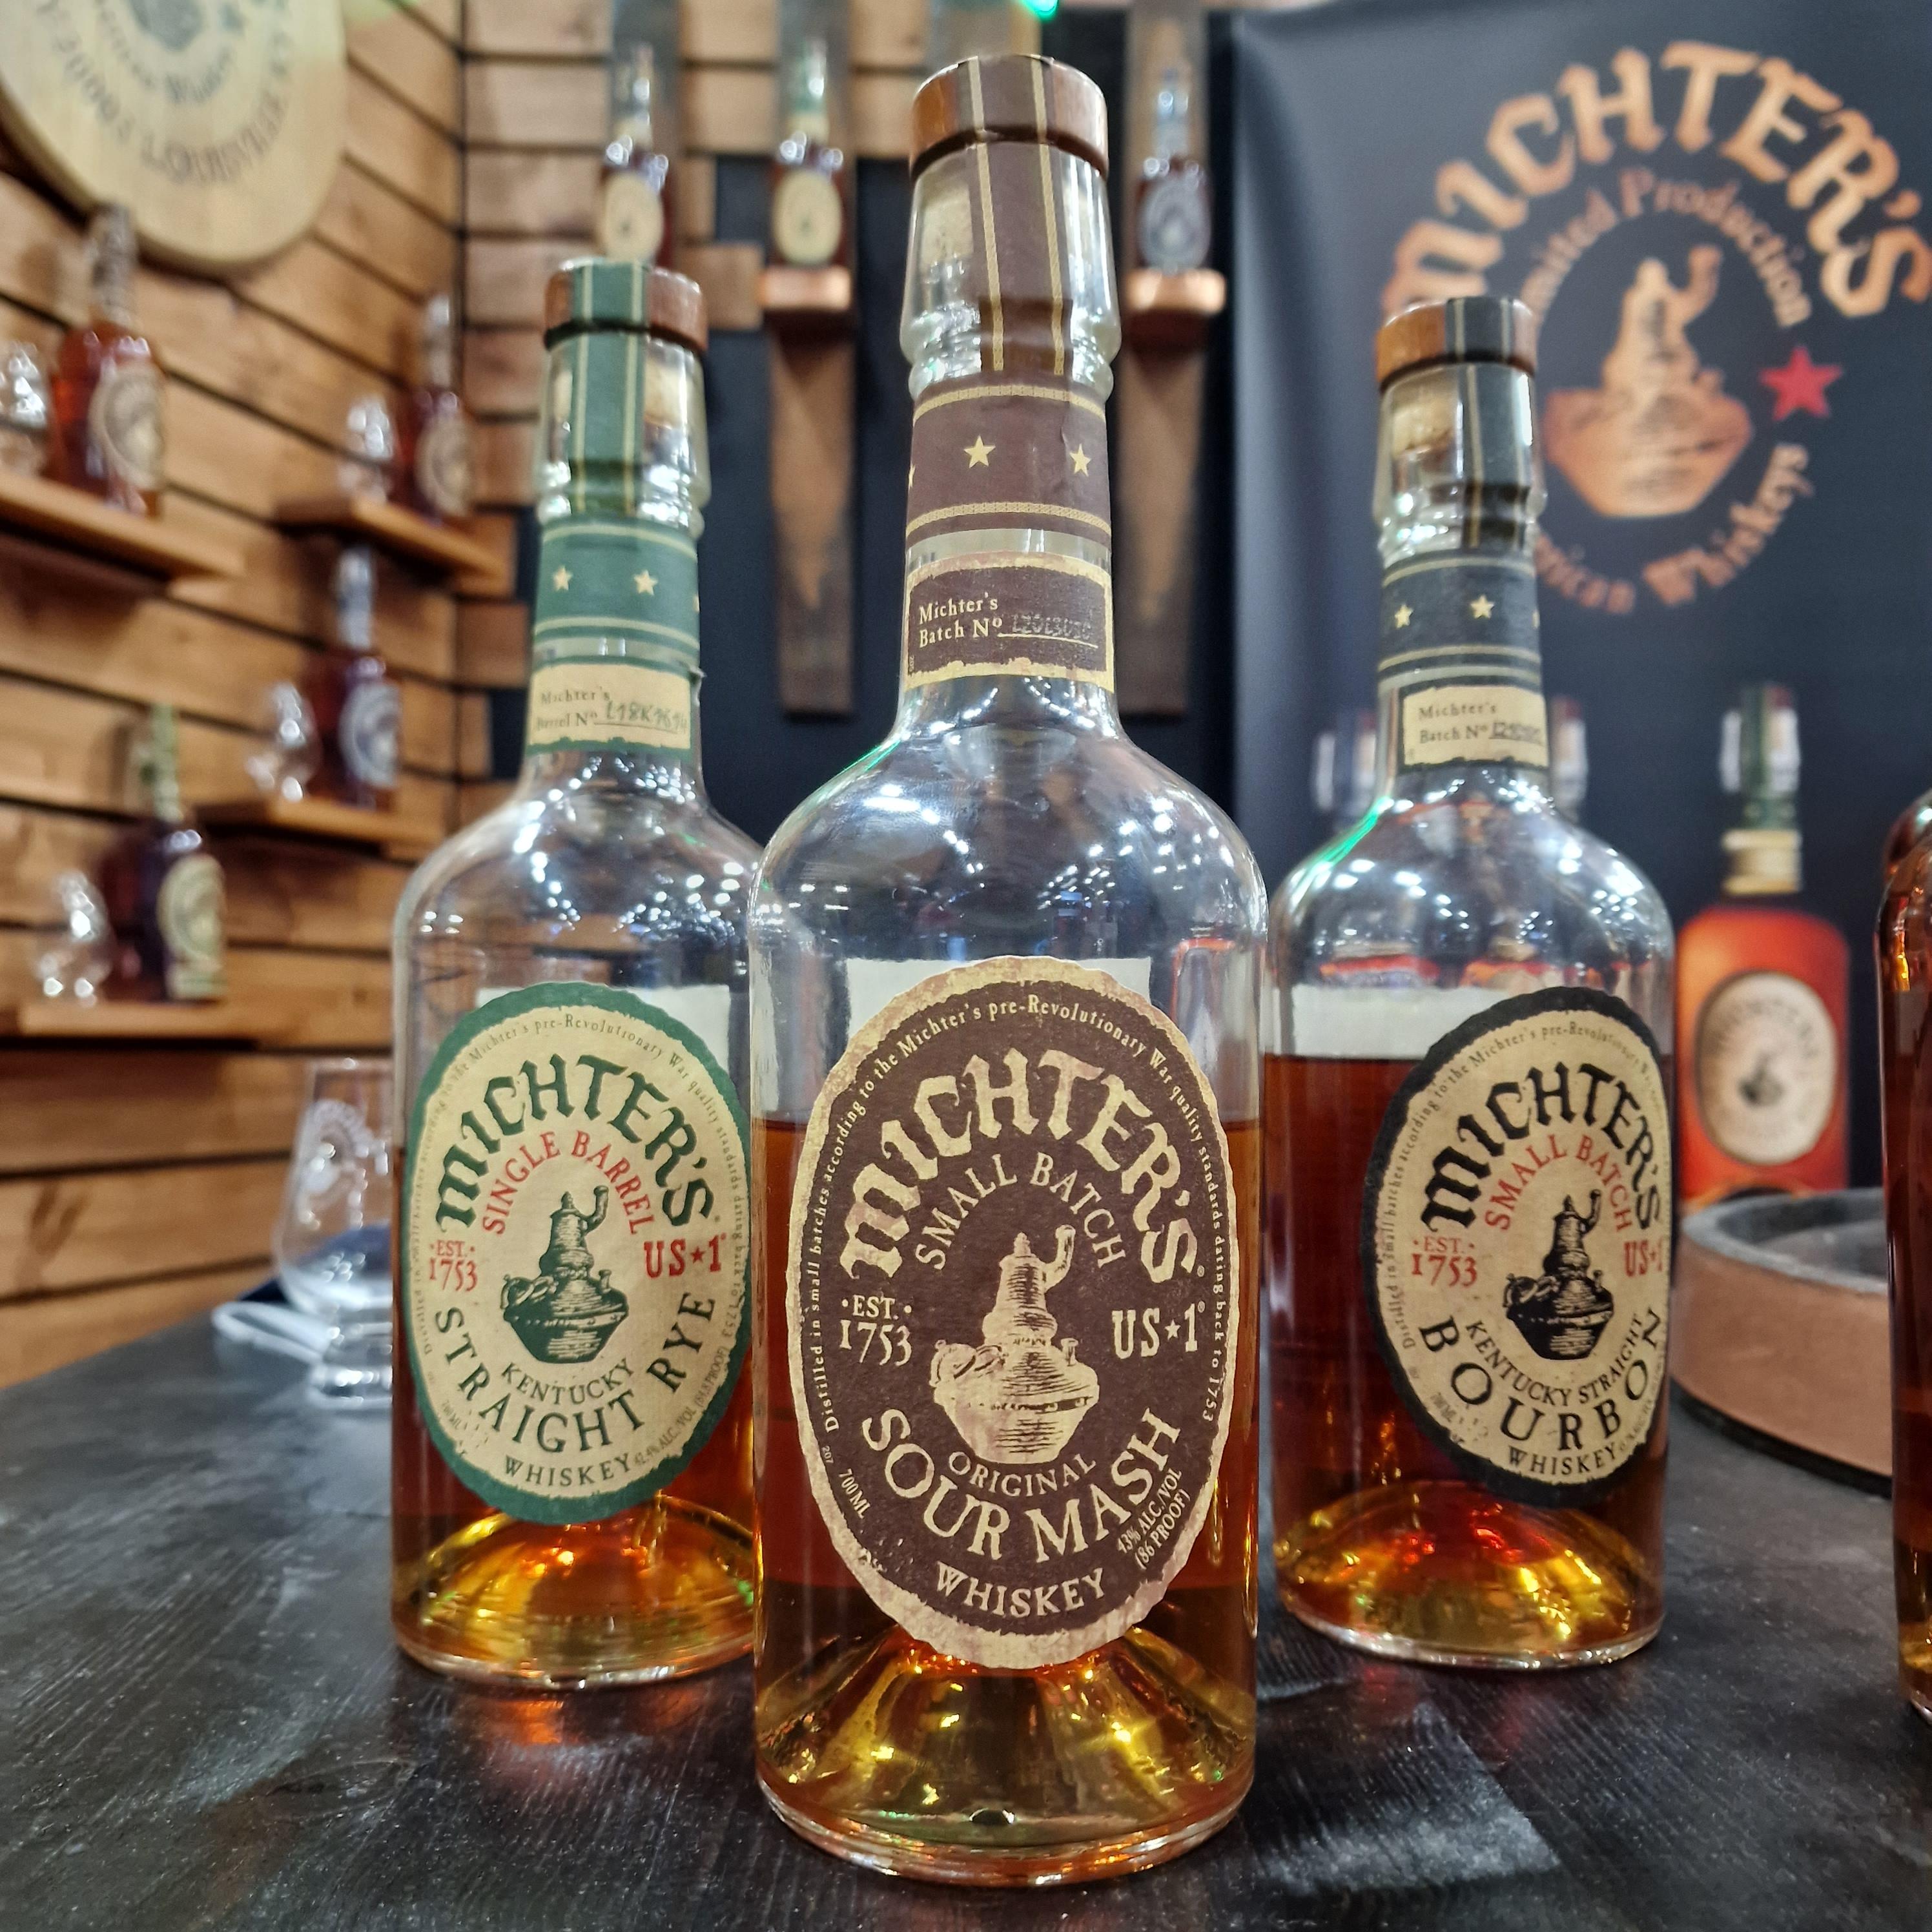 Michter's Whiskey: The History of Whiskey Making